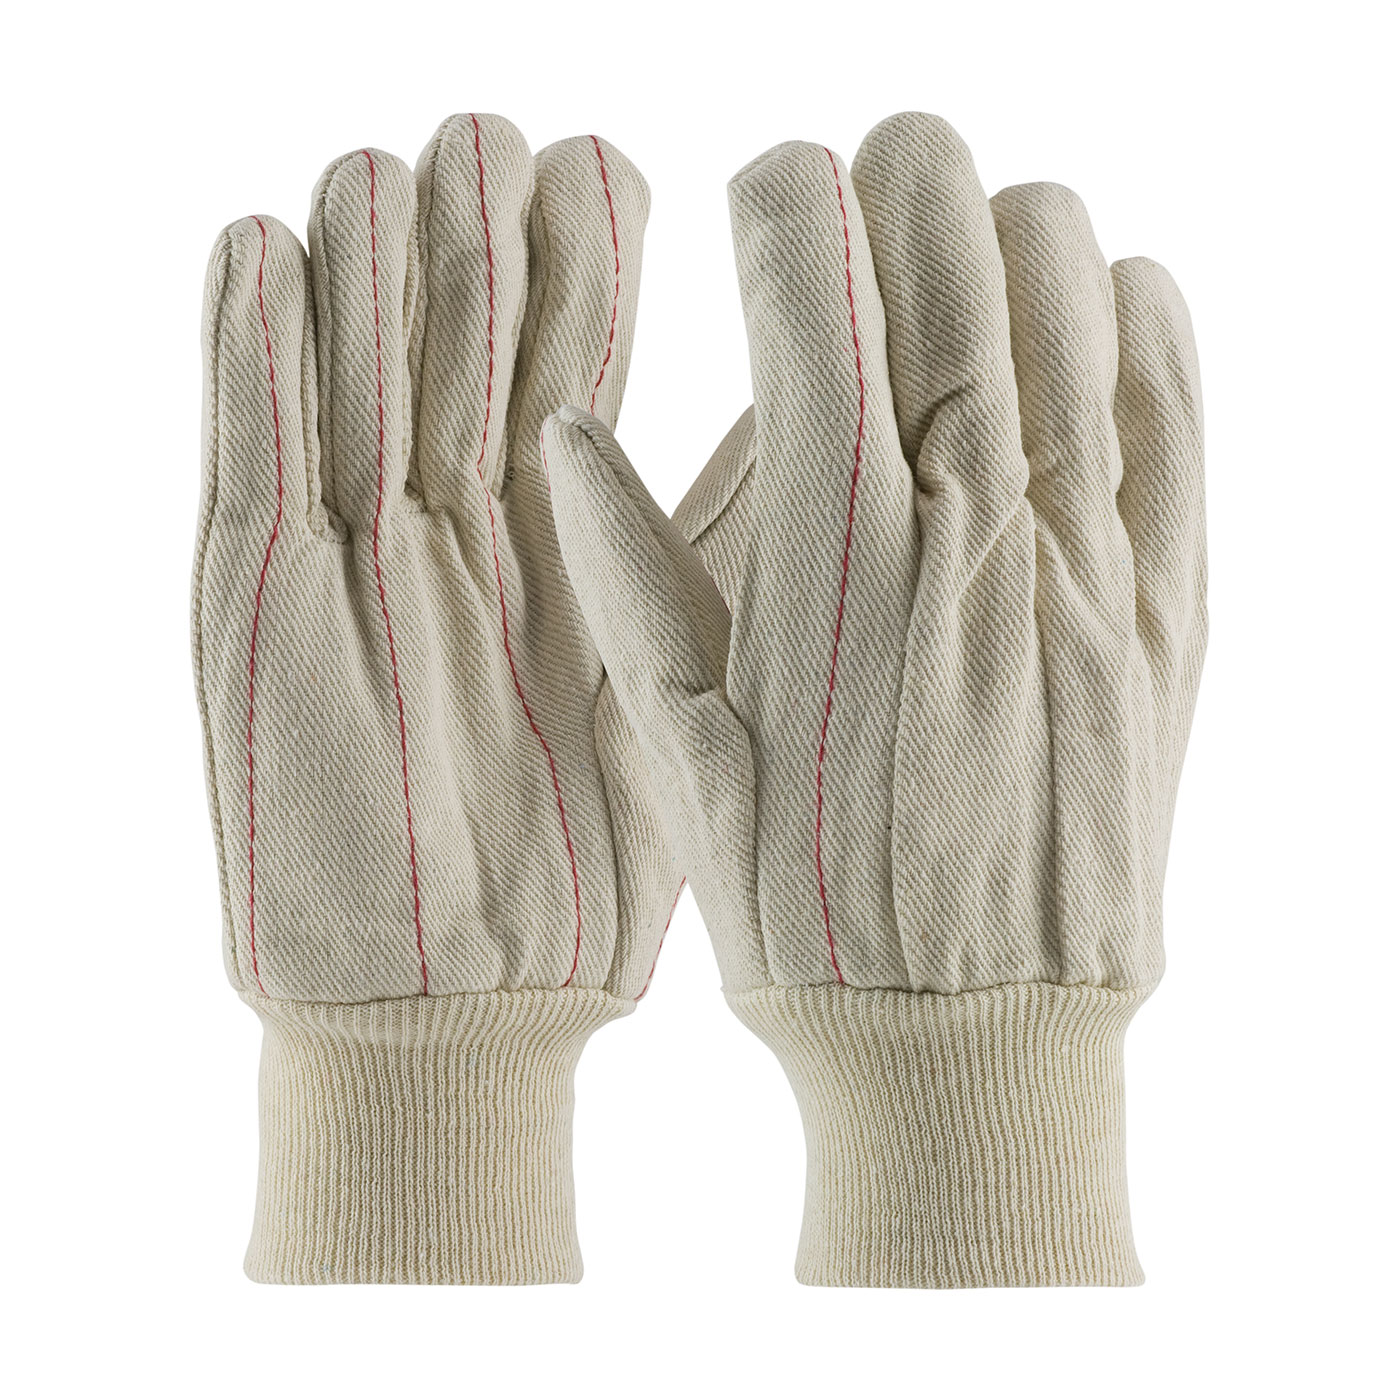 PIP Men's Natural 18oz. Nap-in Finish Double Palm Cotton Canvas Gloves